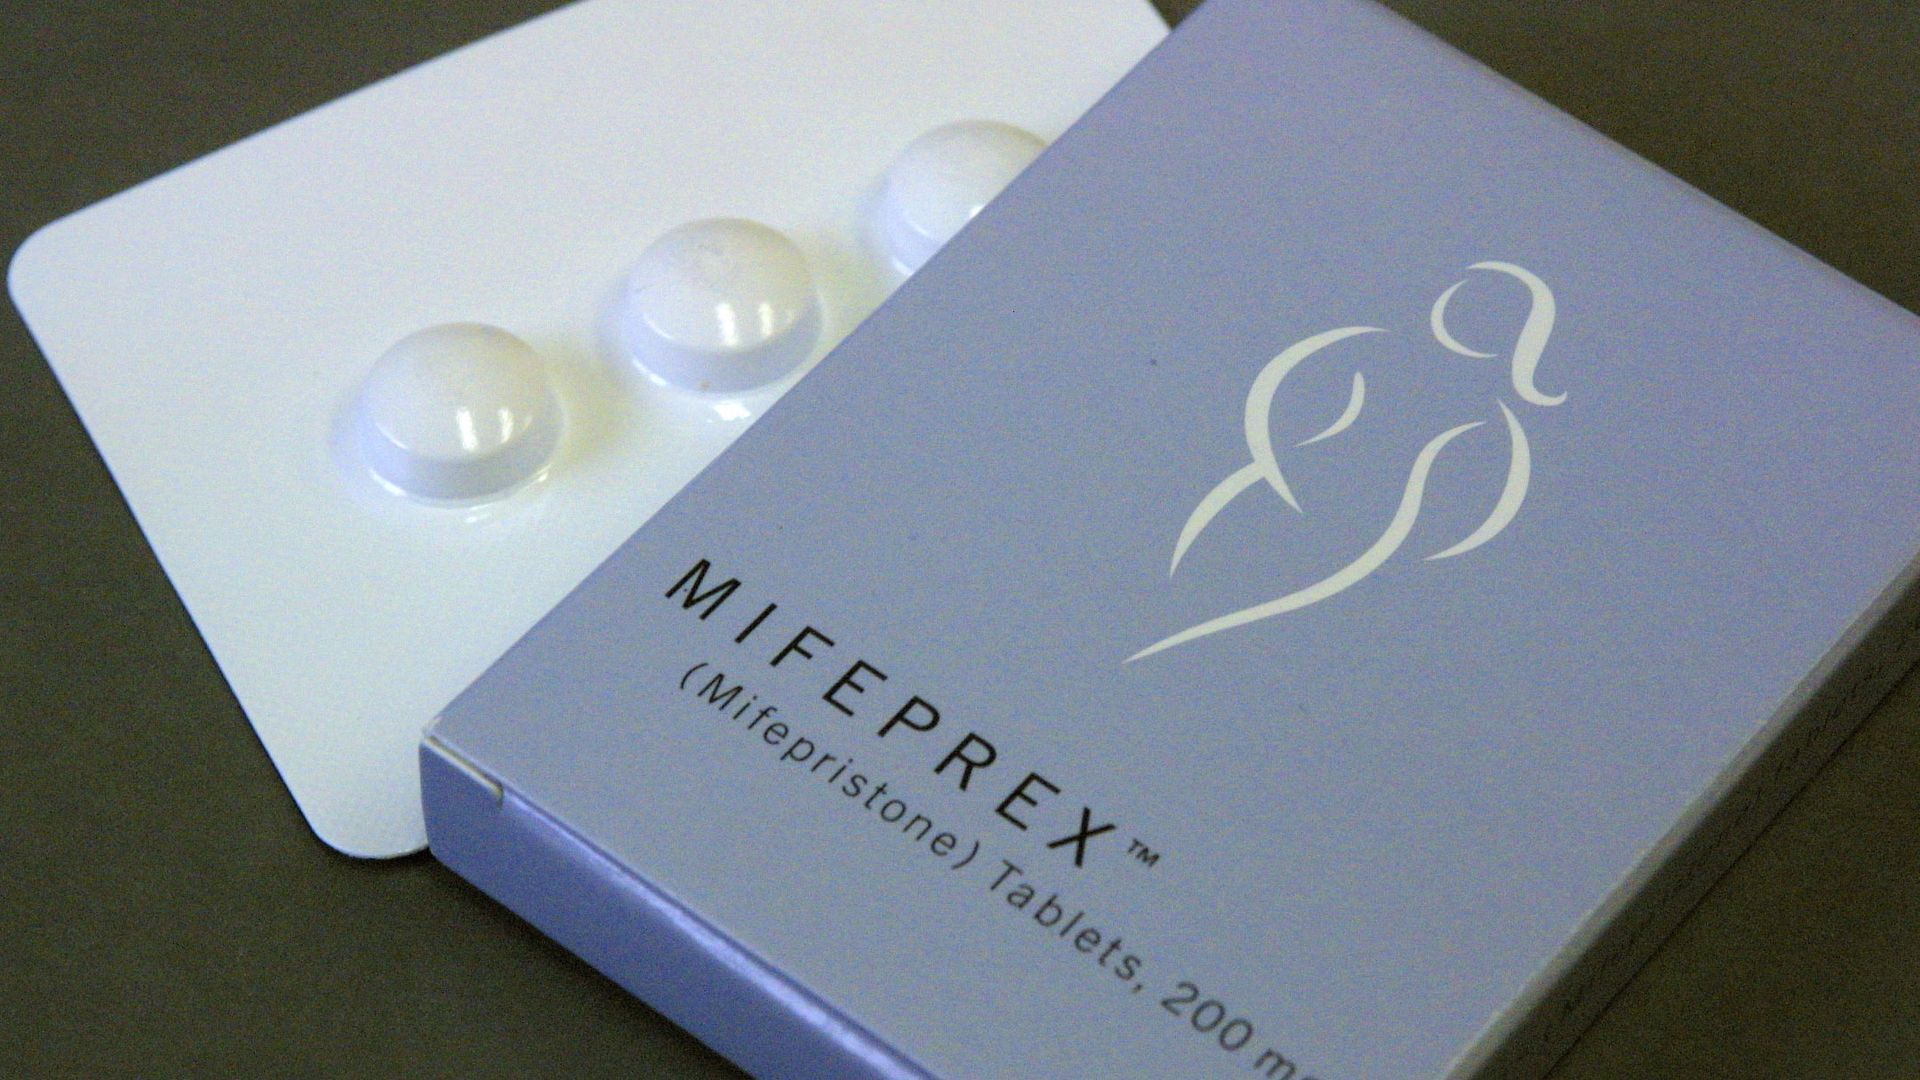 Photo of Mifeprex pills laid out next to the brand's box